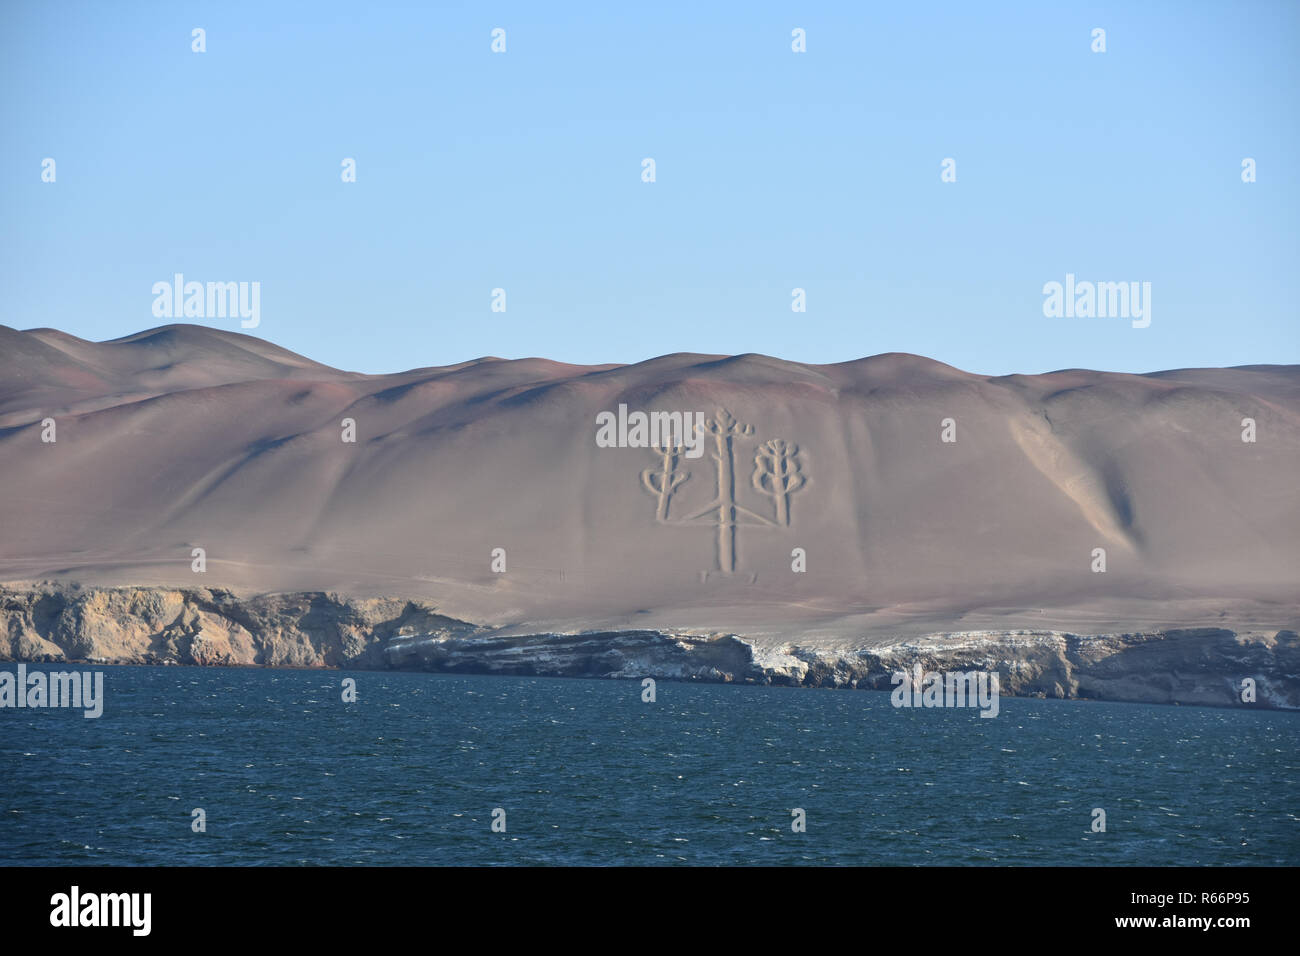 The Paracas Candelabra (Candelabra of the Andes), a 590 ft prehistoric geoglyph found on the north face of the Paracas Peninsula, Peru. Stock Photo